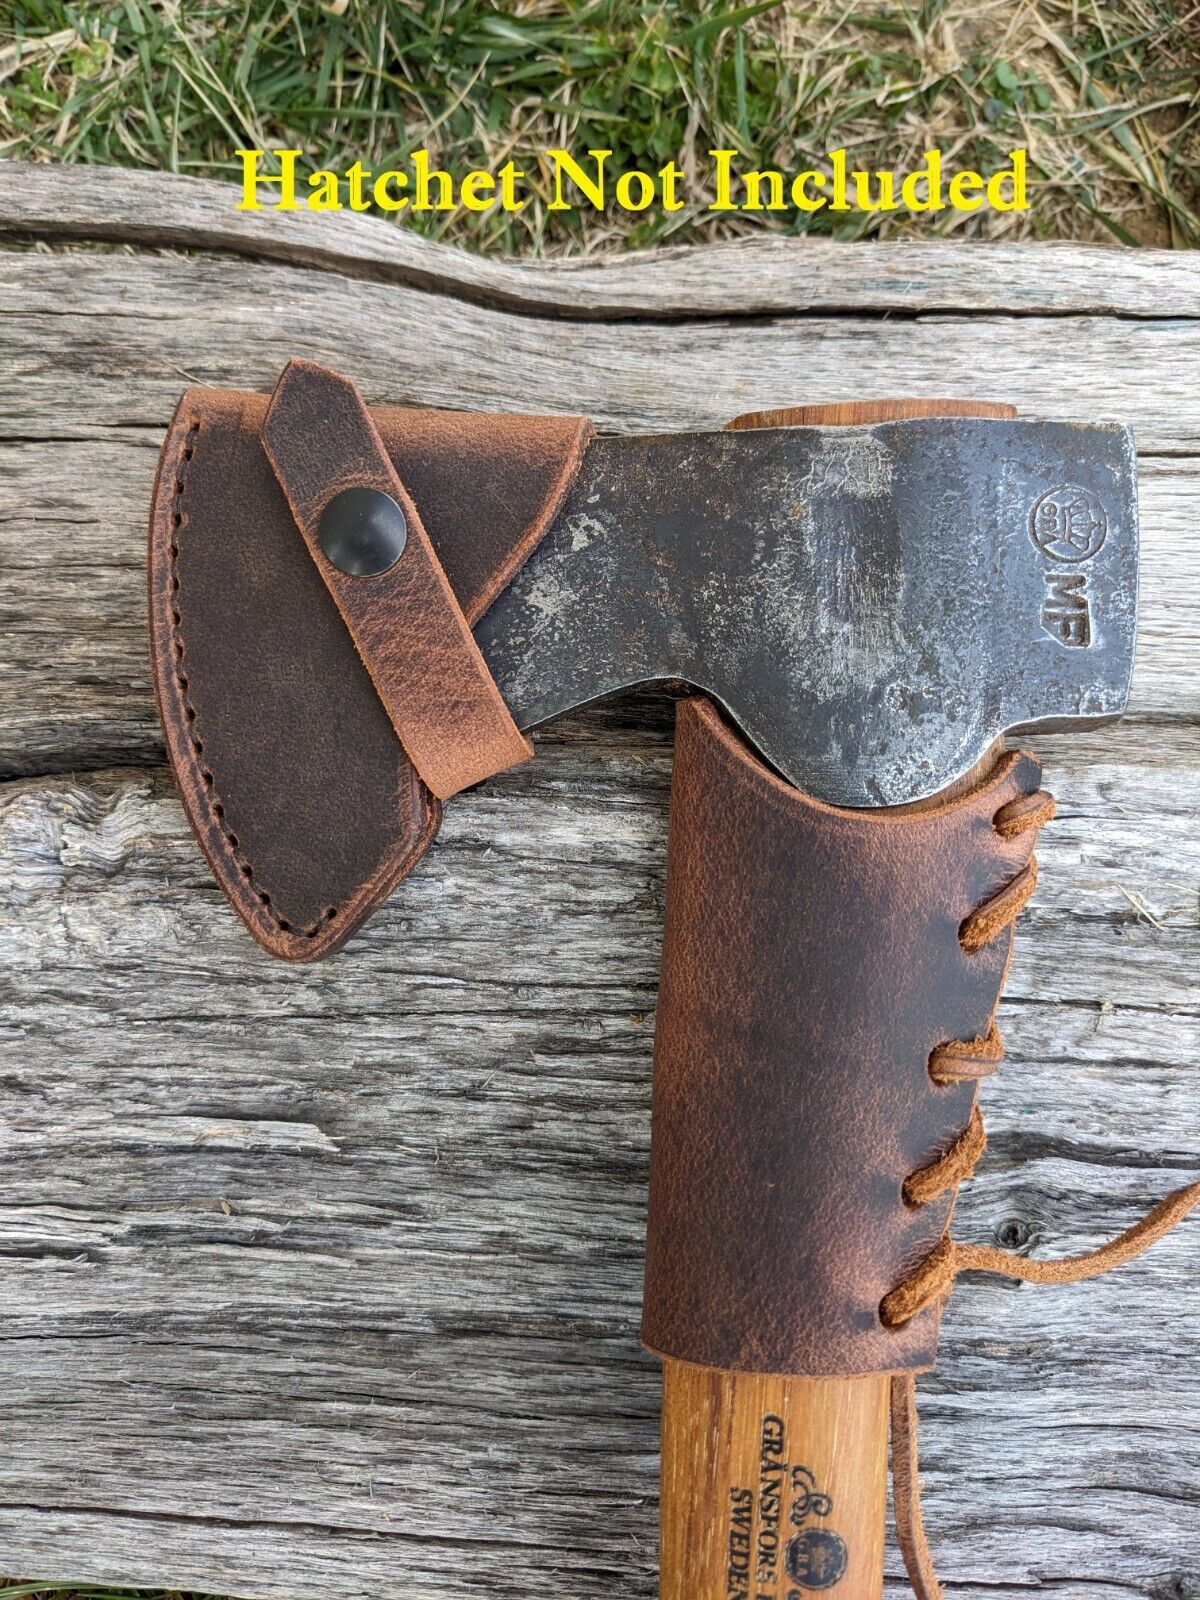 Gransfors Bruk Small Forest Axe Leather Sheath Mask And Guard (Axe NOT Included)